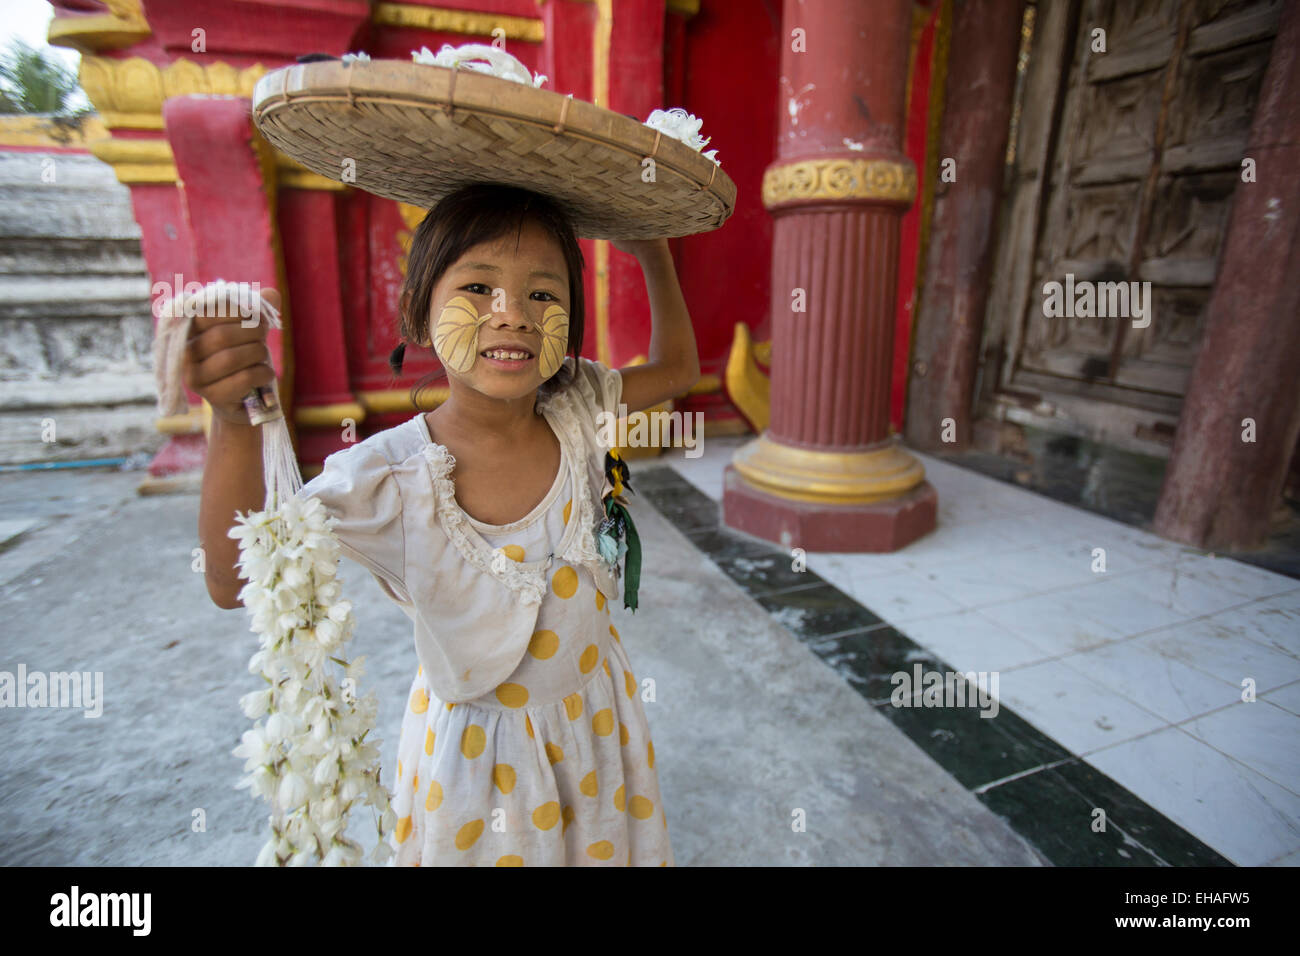 Young girl at Kuthodaw Paya temple in Mandalay, Myanmar, selling flowers for offerings Stock Photo